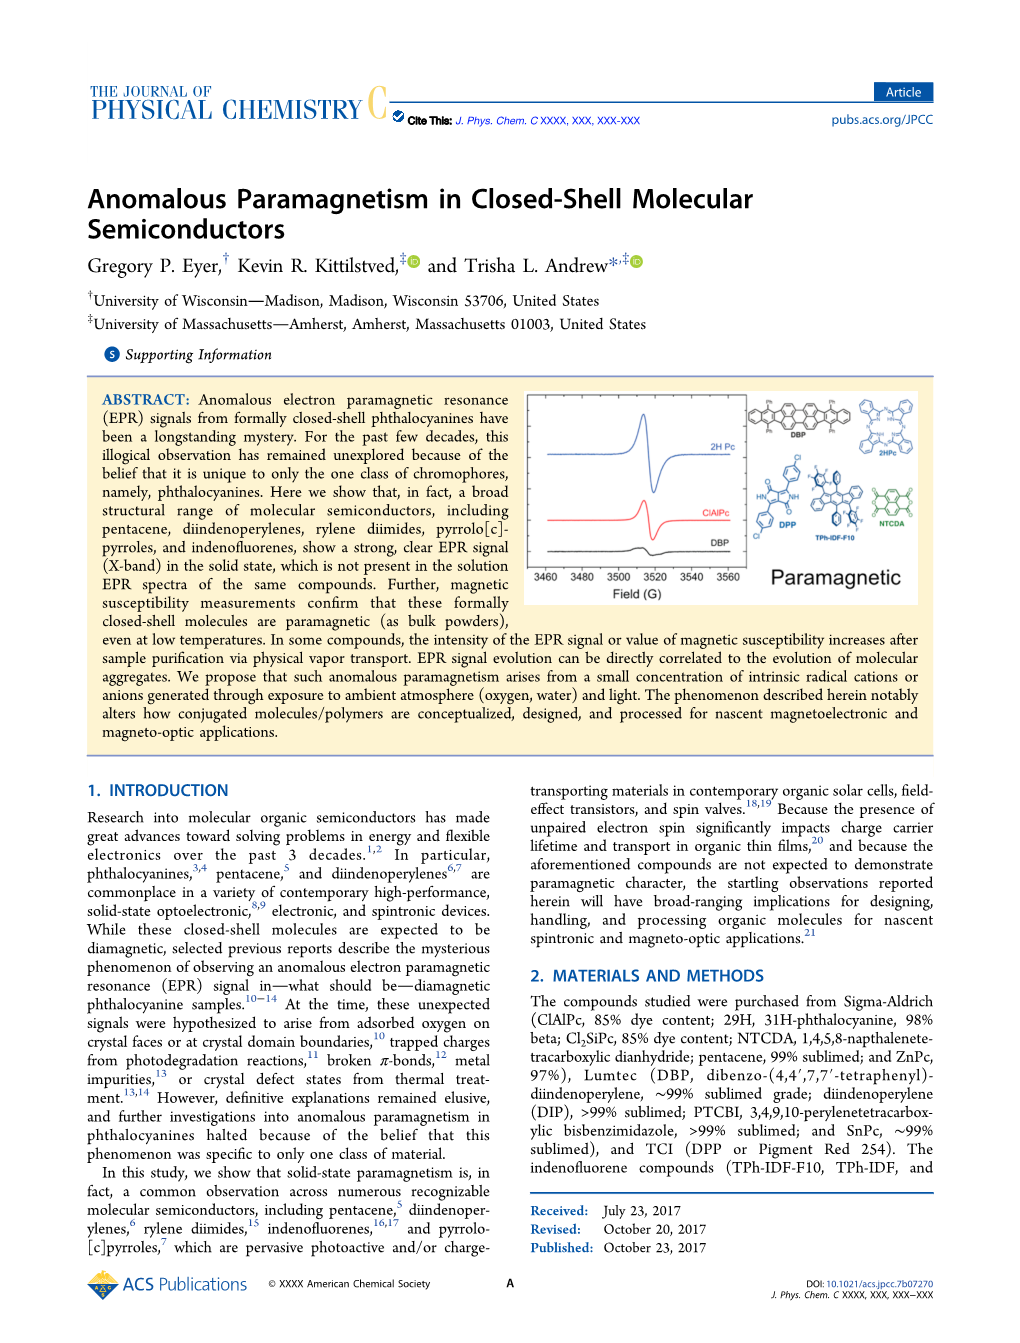 Anomalous Paramagnetism in Closed-Shell Molecular Semiconductors † ‡ ‡ Gregory P